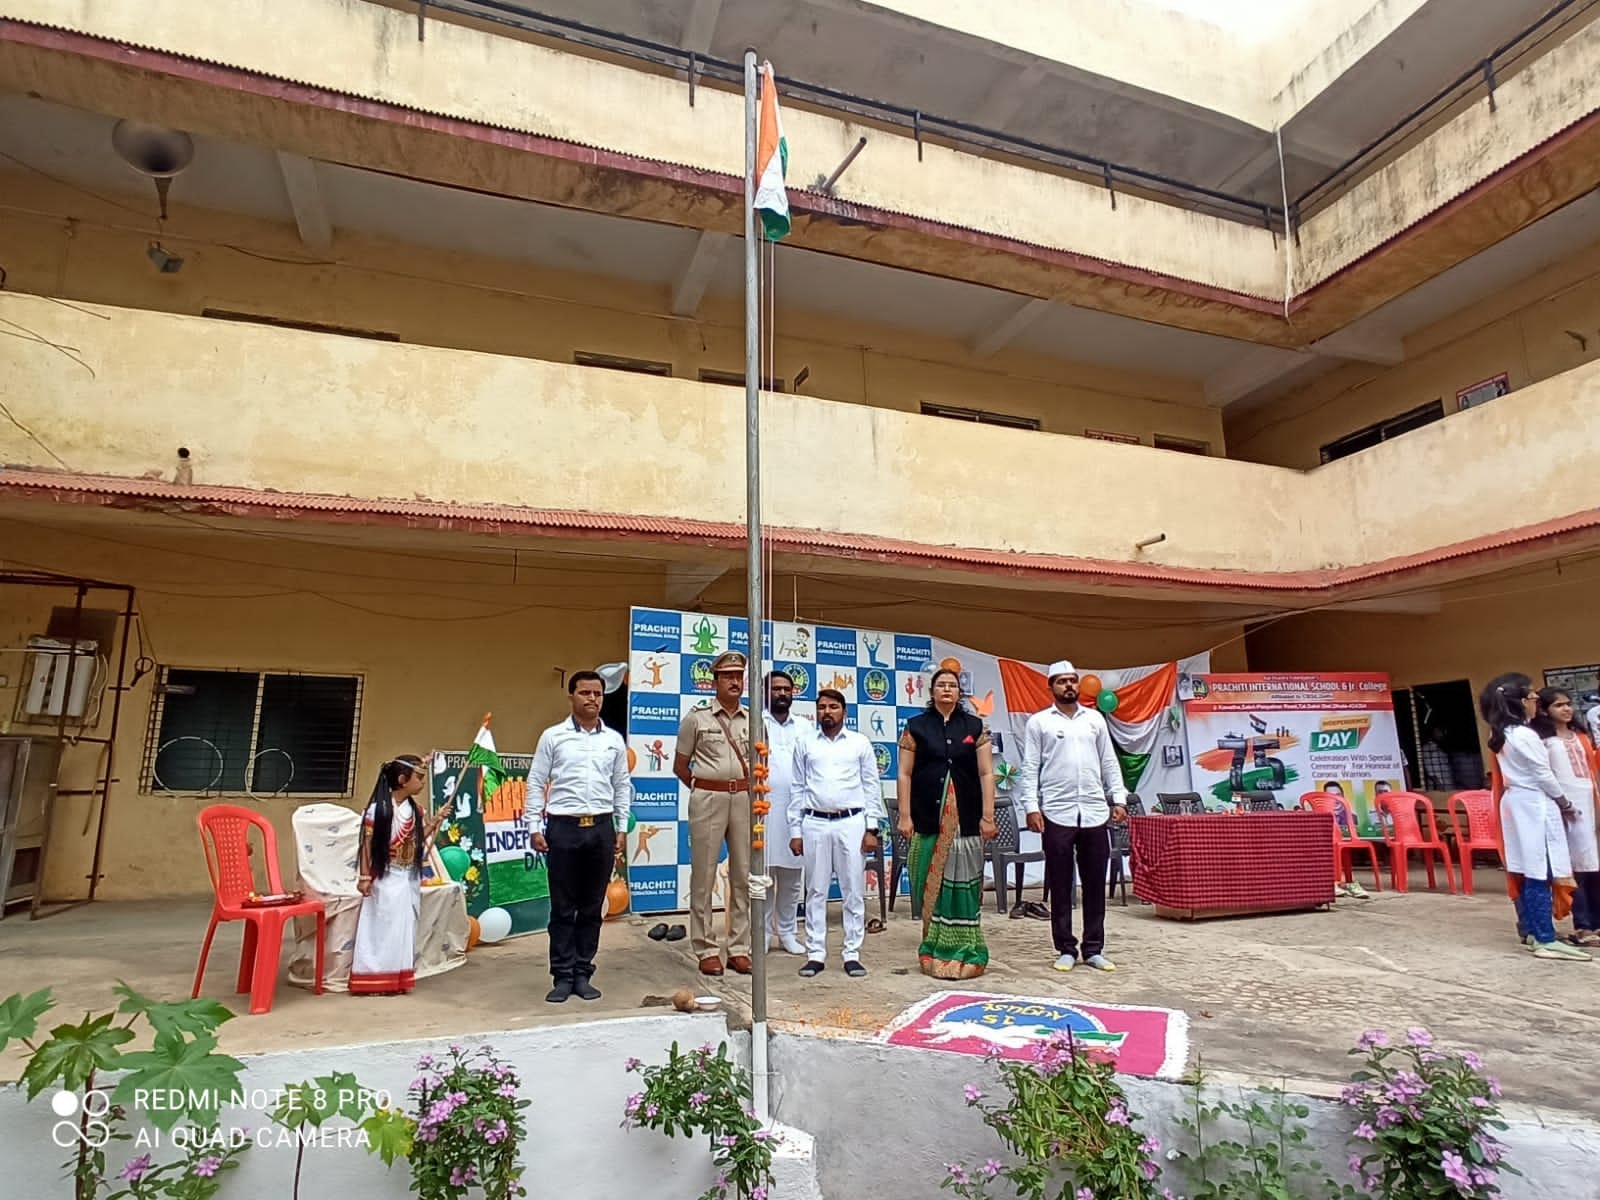 Independence day was celebrated with great enthusiasm and patriotic fervor on 15th August, 2021 in the Prachiti International School and Junior college